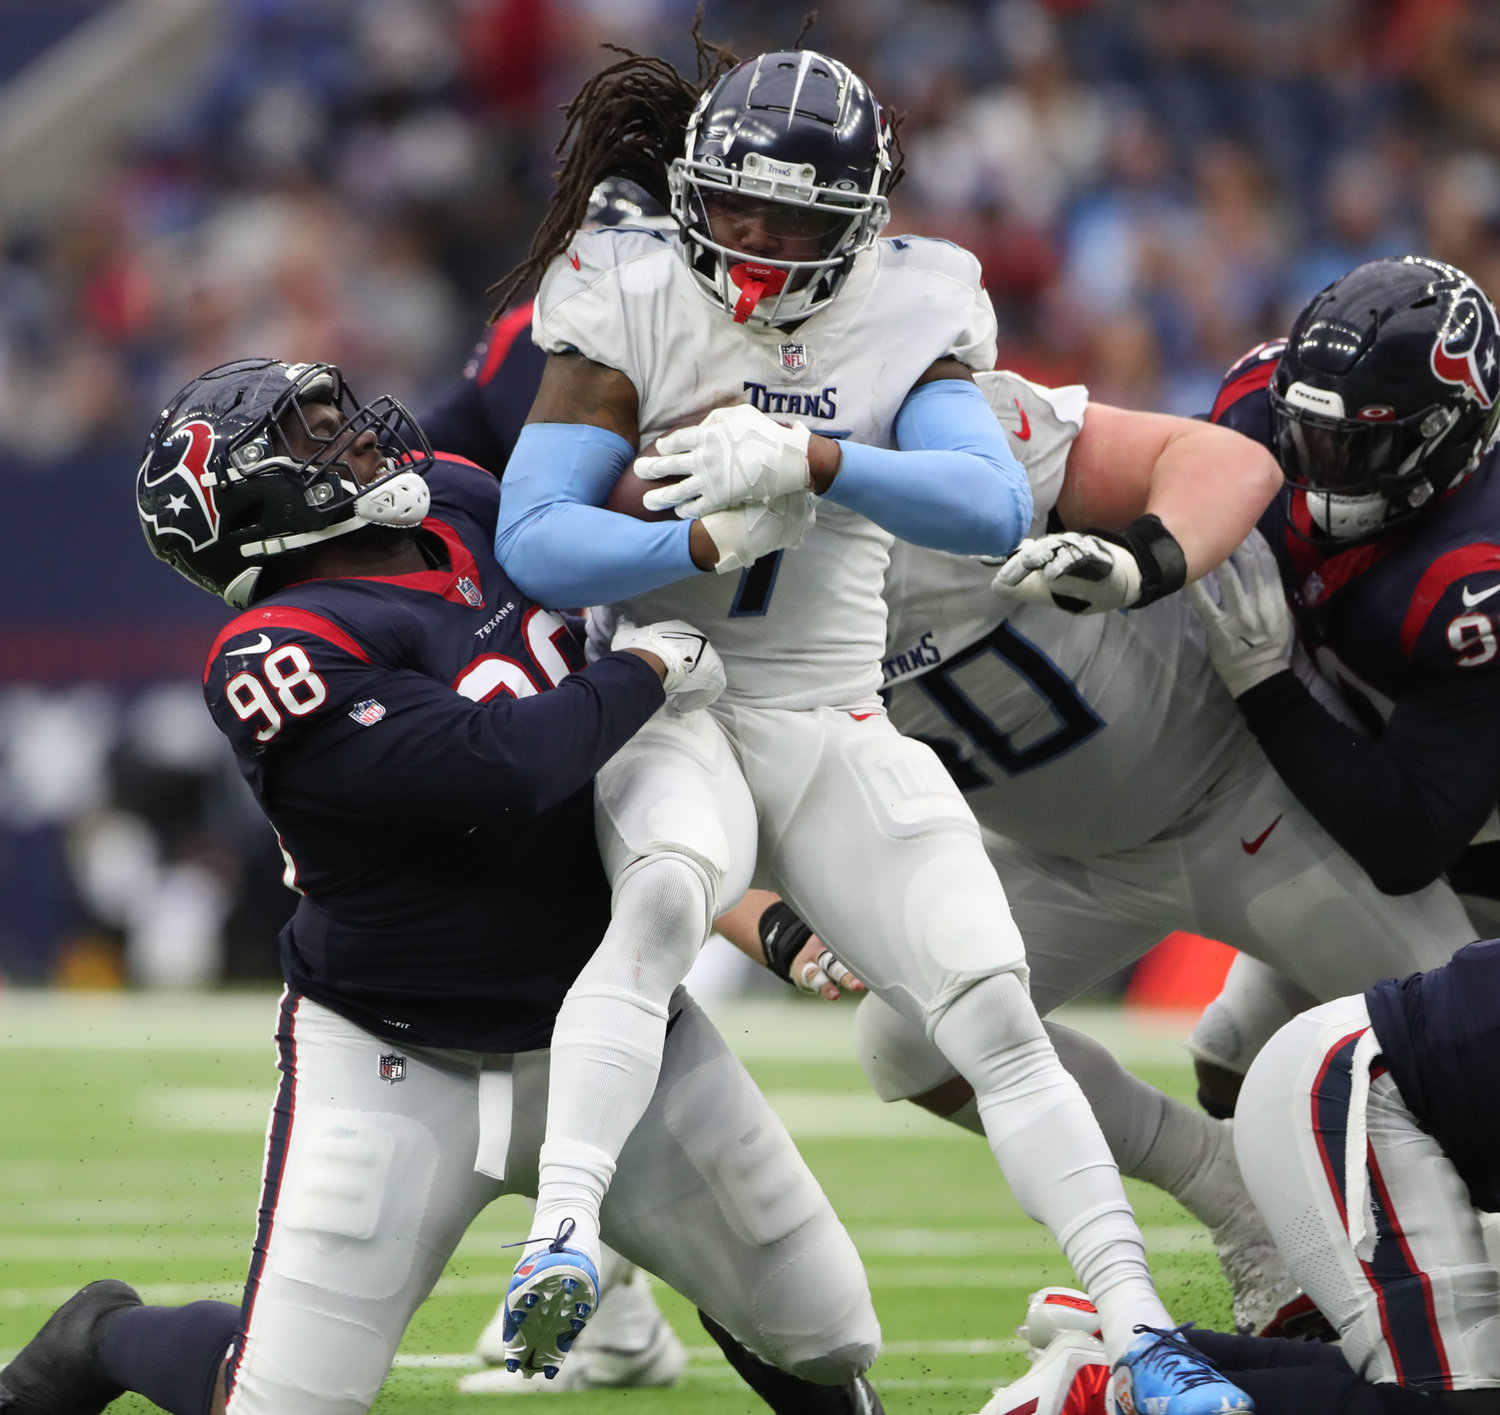 Houston Texans defensive end Michael Dwumfour (98) tackles Tennessee Titans running back D'Onta Foreman (7) for a loss during an NFL game on Jan. 9, 2022 in Houston, Texas. The Titans won, 28-25.